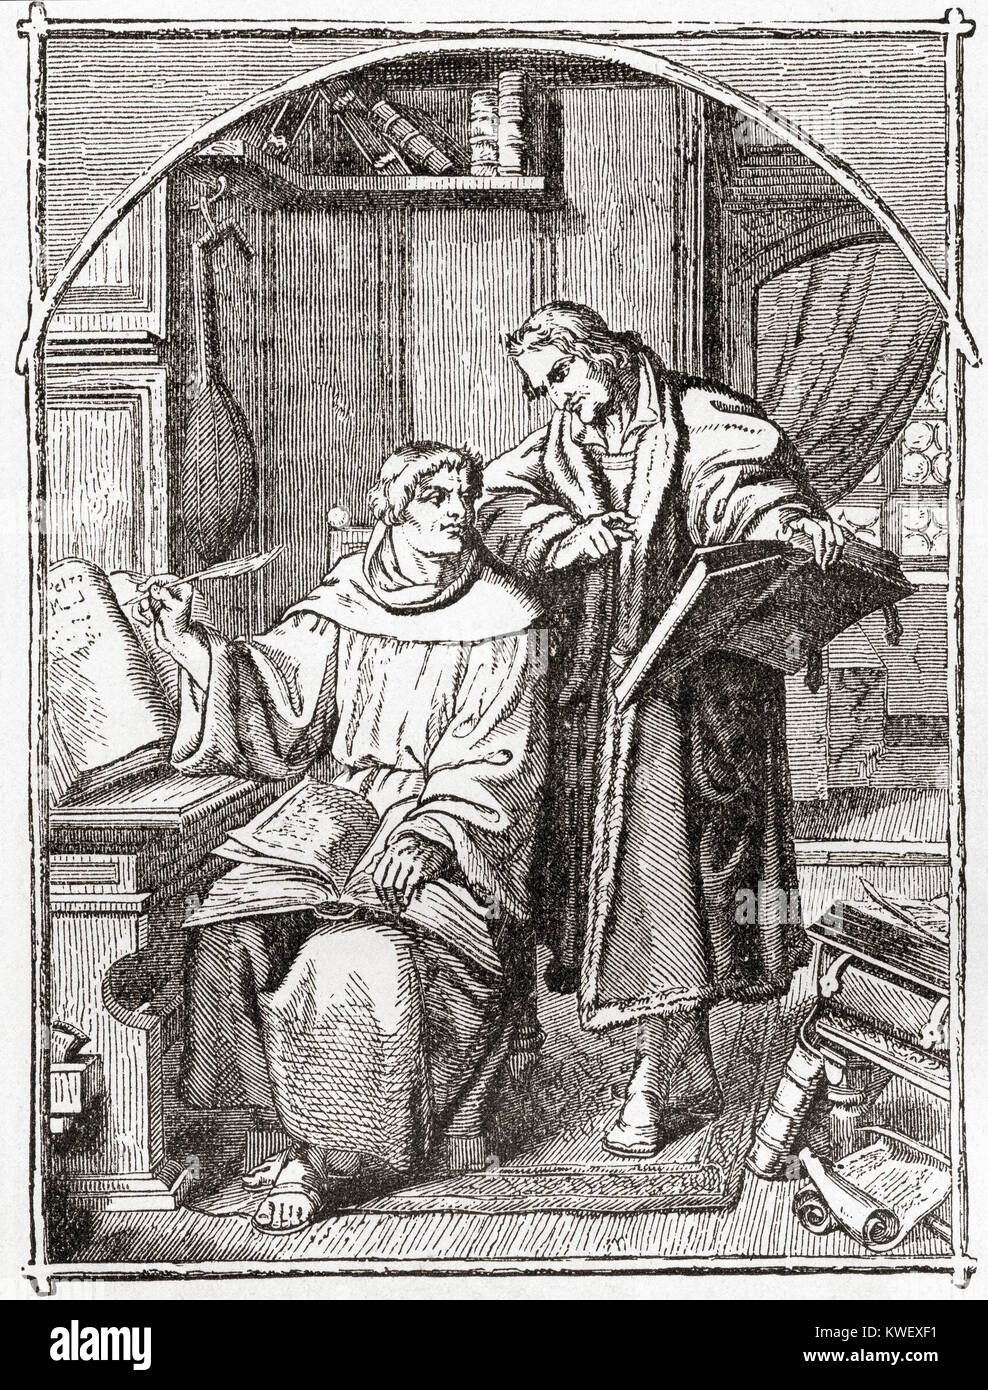 Luther and Melancthon translating the Bible.  Martin Luther, 1483-1546.  German theologian and religious reformer.  Philipp Melancthon, born Philipp Schwartzerdt, 1497- 1560.  German author, humanist, reformer, theologian and educator.  From Ward and Lock's Illustrated History of the World, published c.1882. Stock Photo